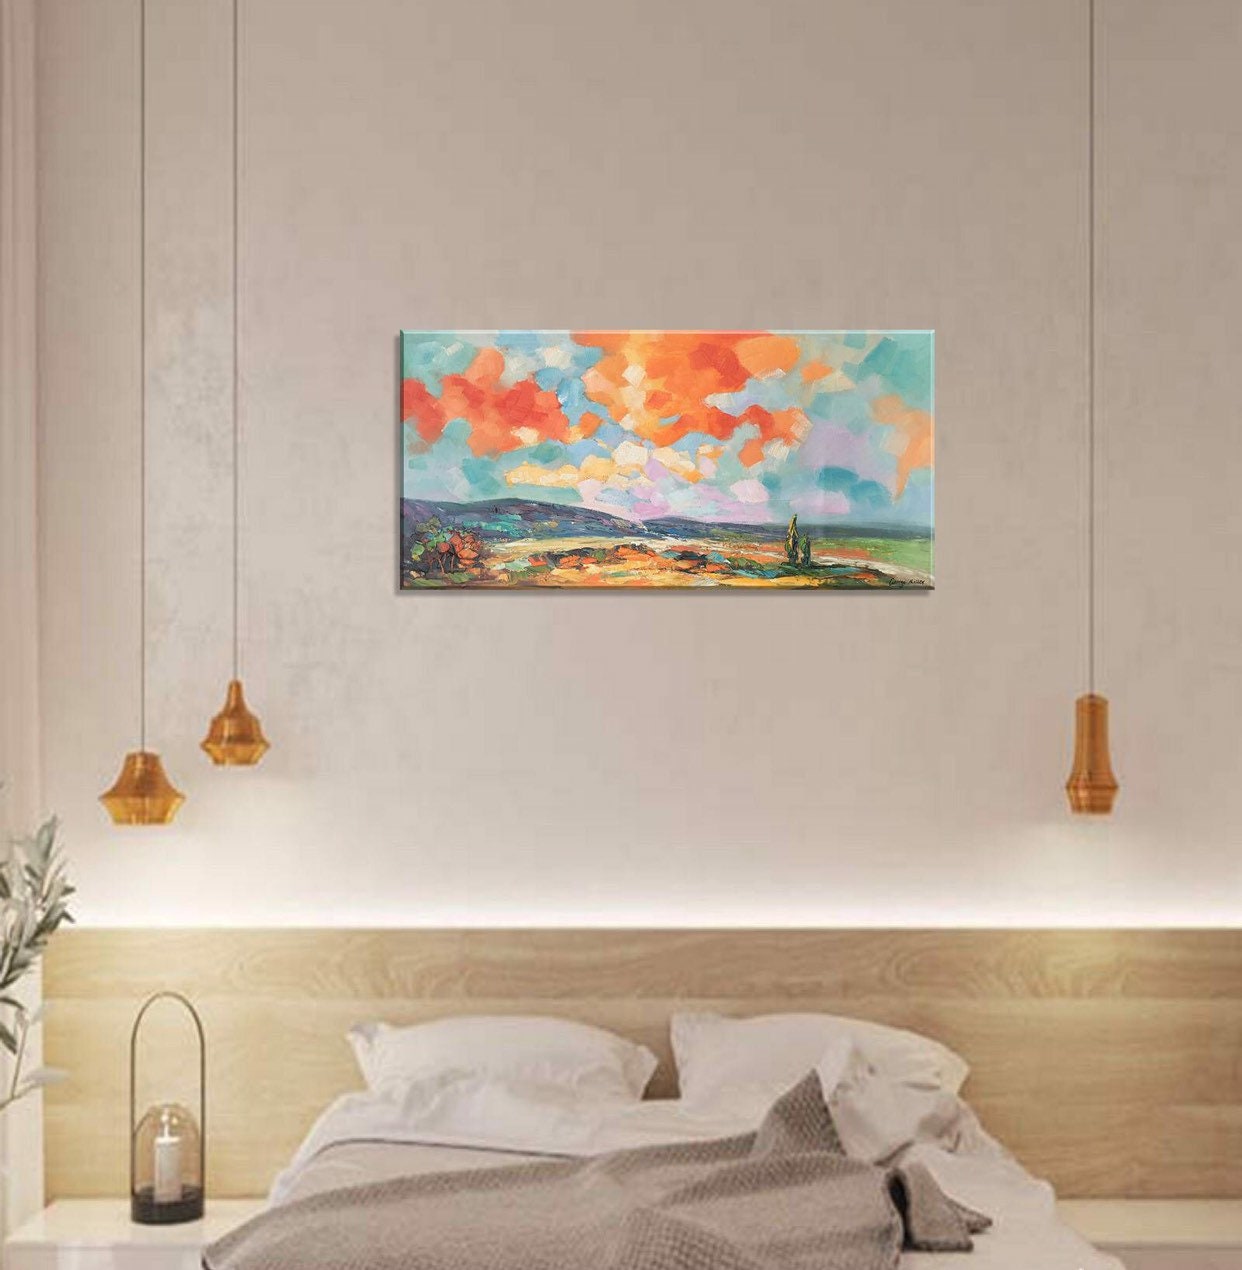 Canvas Art, Oil Painting Abstract, Living Room Art, Modern Painting, Abstract Wall Art, Oil Painting Original, Large Abstract Painting, 48"